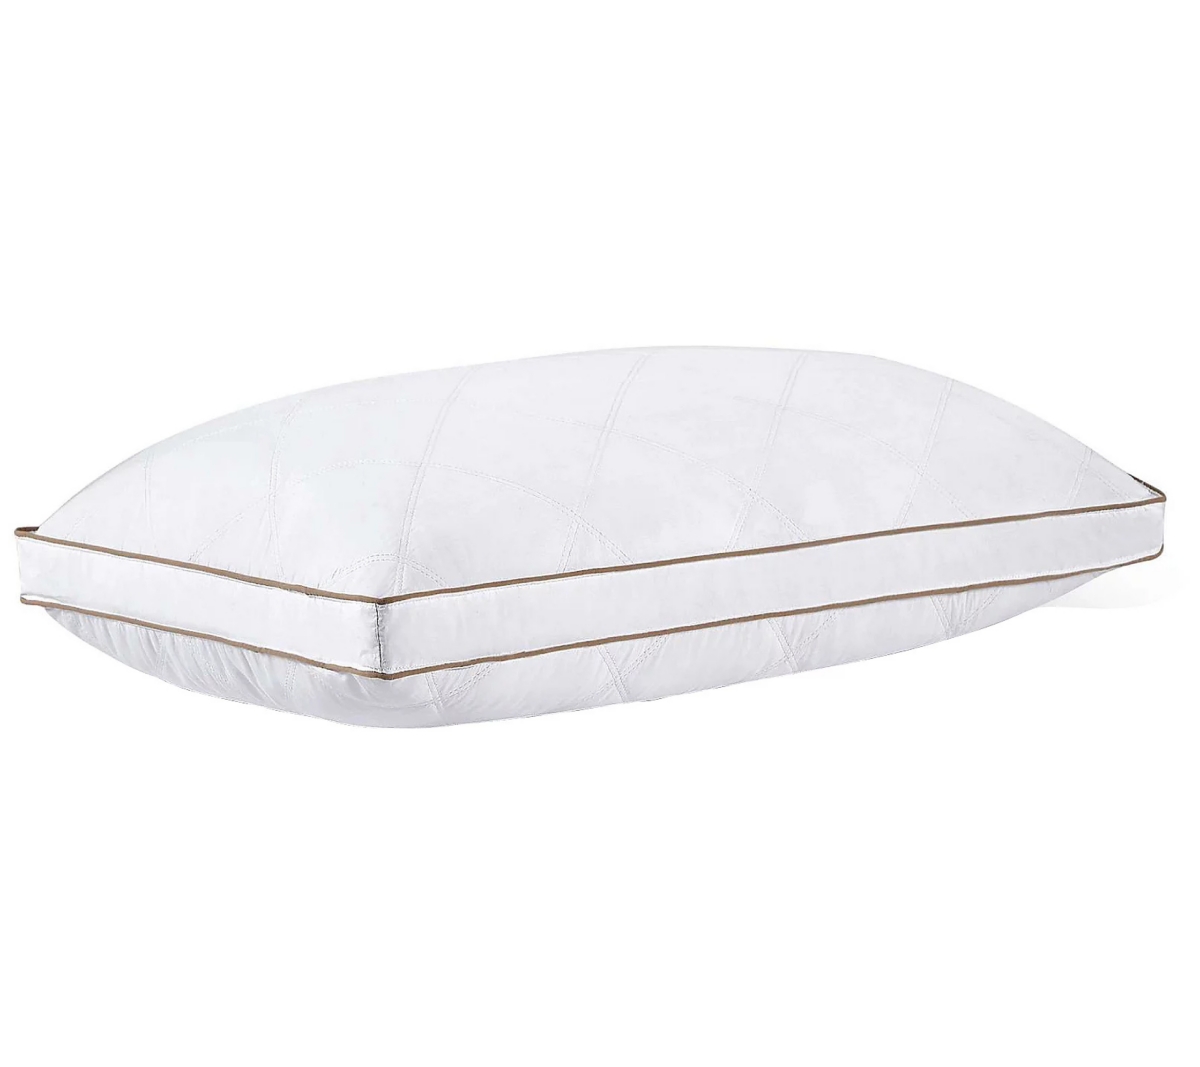 Dr Pillow Goose Feather Pillow In White